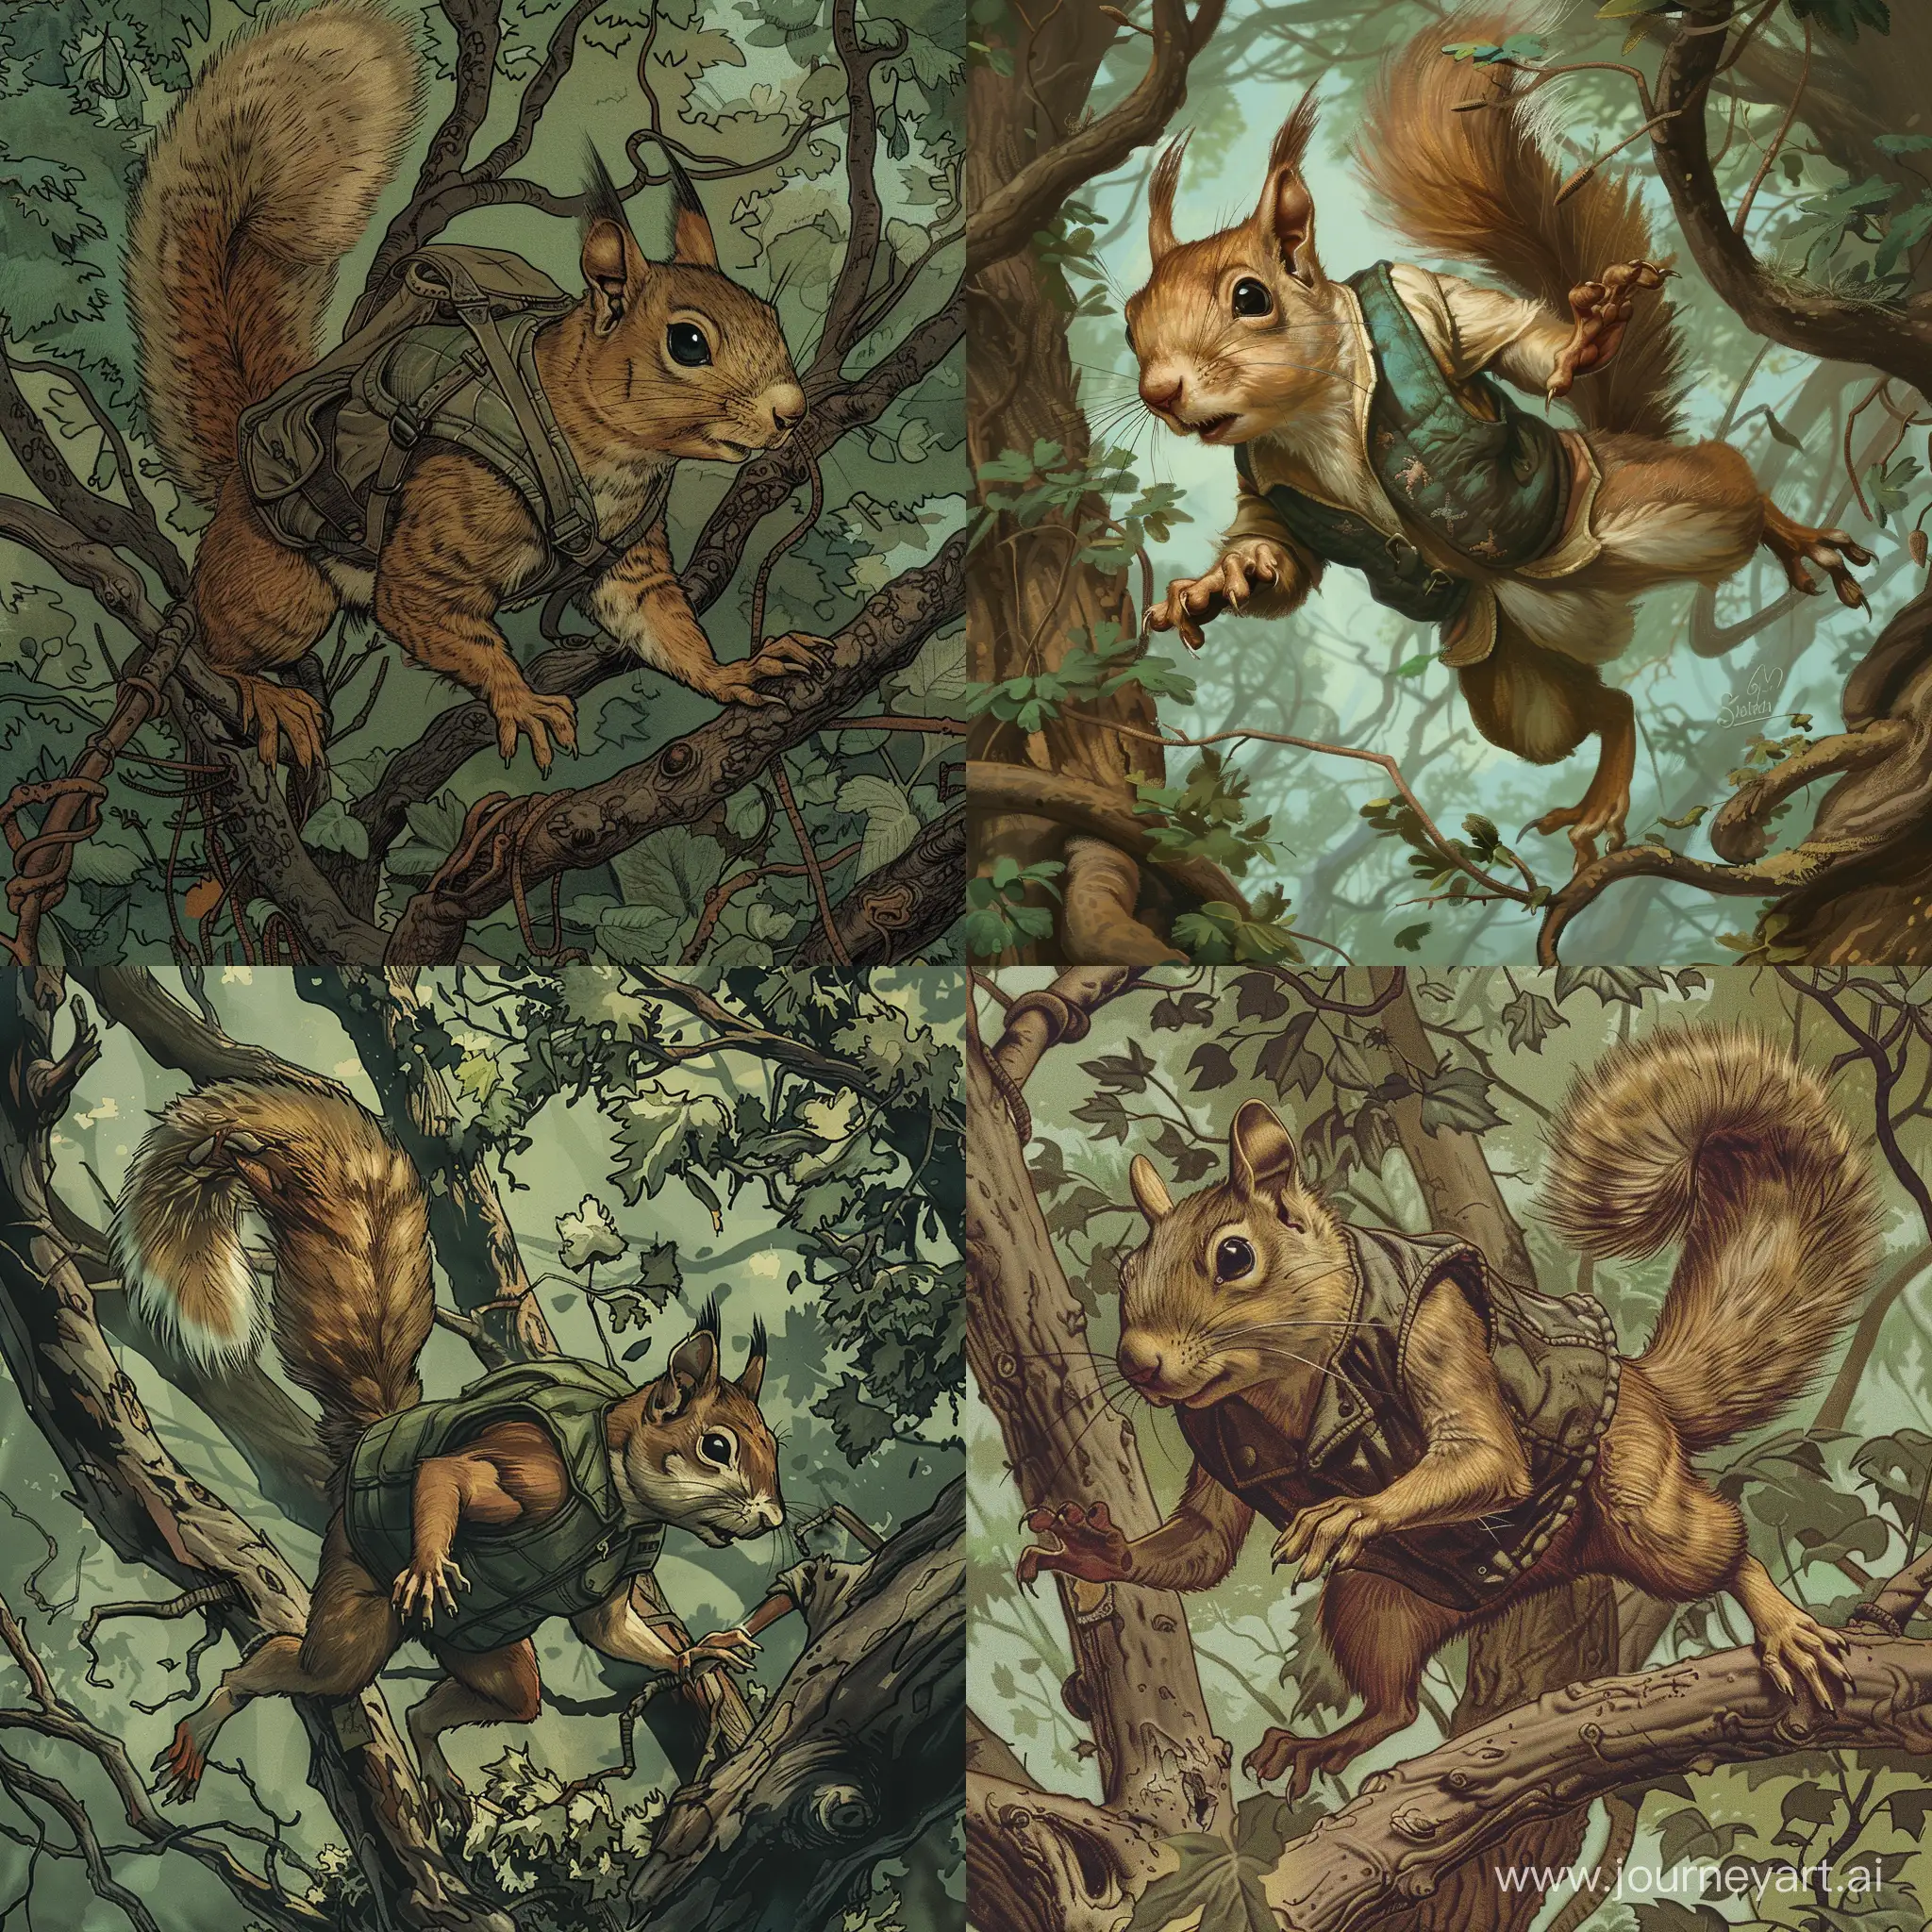 a swift squirrel, Darting through the lush canopy of the Whispering Woods, Sasha leads her companions on a daring chase through the maze of branches and foliage. Her vest blends seamlessly with the earthy tones of the forest, and her agile leaps carry her effortlessly from tree to tree as she scouts ahead for any signs of danger. , 1970's grimdark fantasy style, gritty, detailed